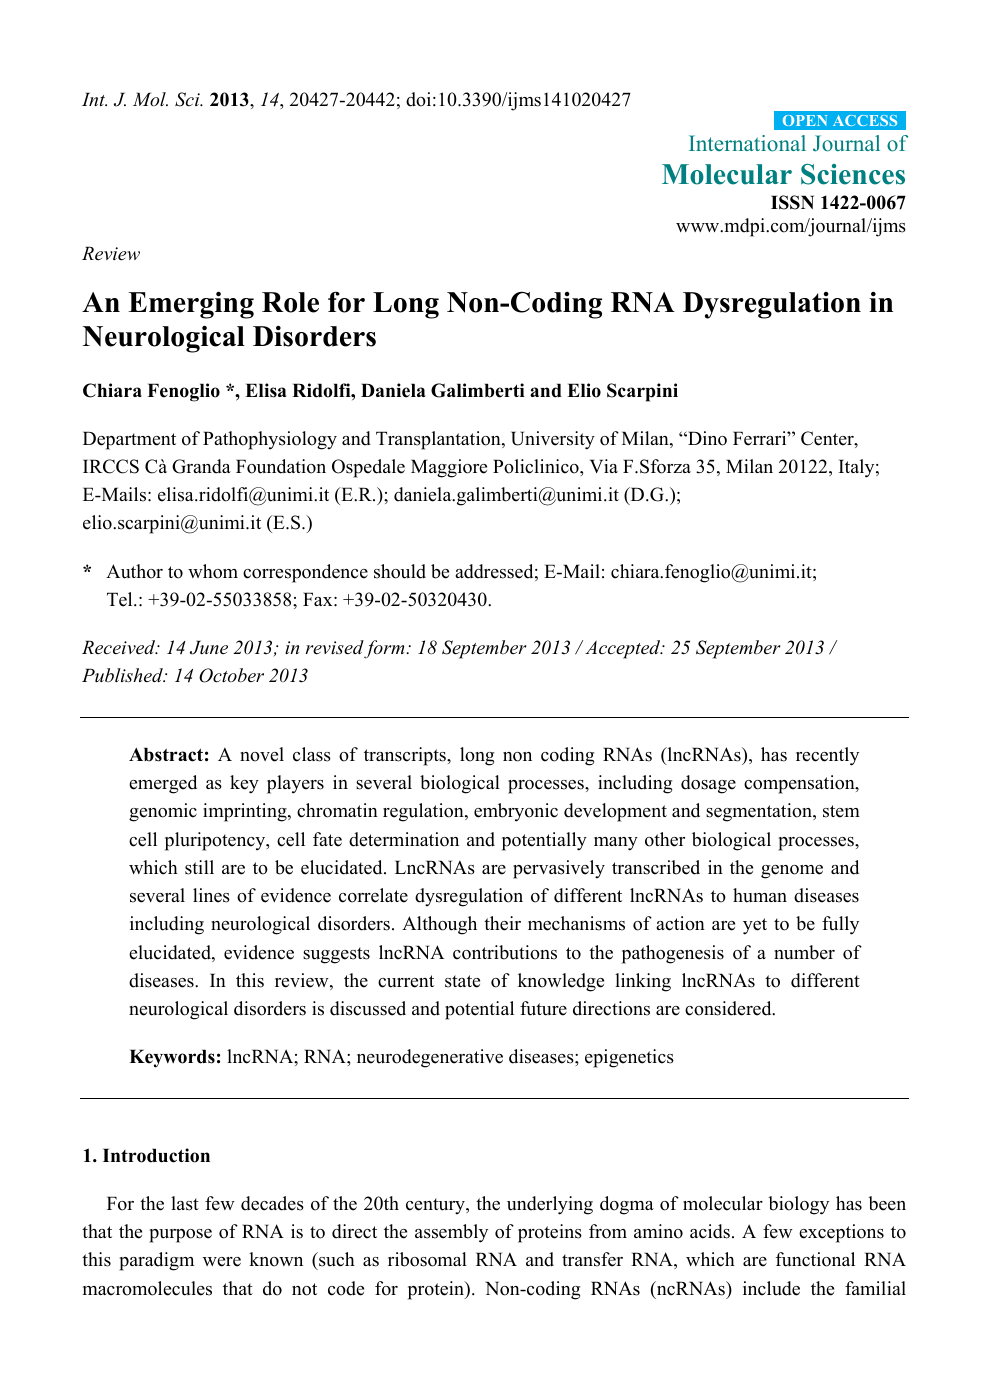 An Emerging Role For Long Non Coding Rna Dysregulation In Neurological Disorders Topic Of Research Paper In Biological Sciences Download Scholarly Article Pdf And Read For Free On Cyberleninka Open Science Hub